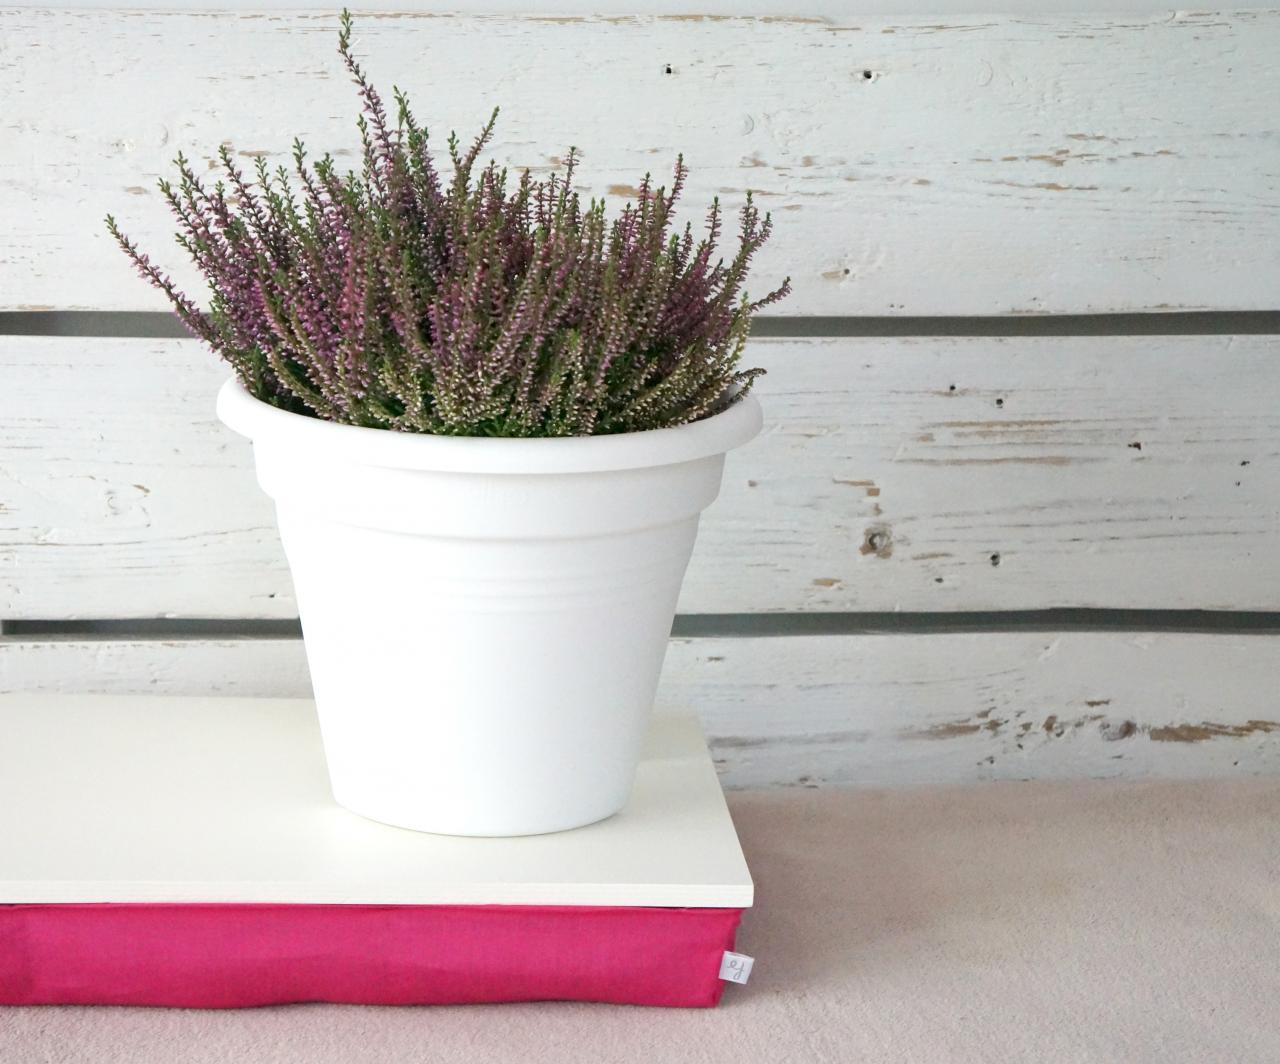 Ipad Stable Table Or Laptop Lap Desk Without Edges - Off White With Fuchsia Linen Pillow